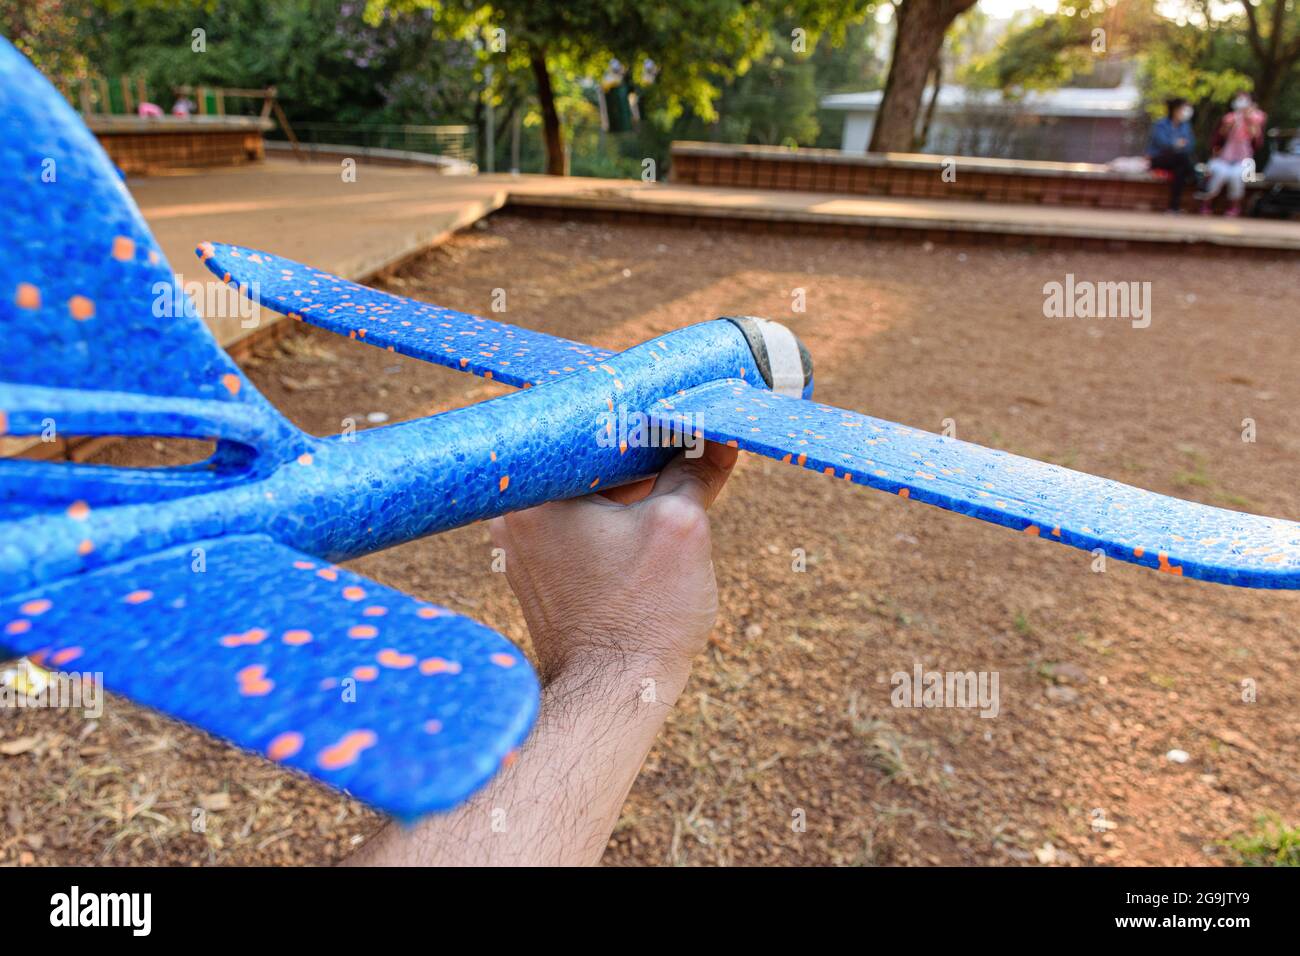 Closeup of a blue styrofoam plane with orange spots being held by adult hand. Stock Photo